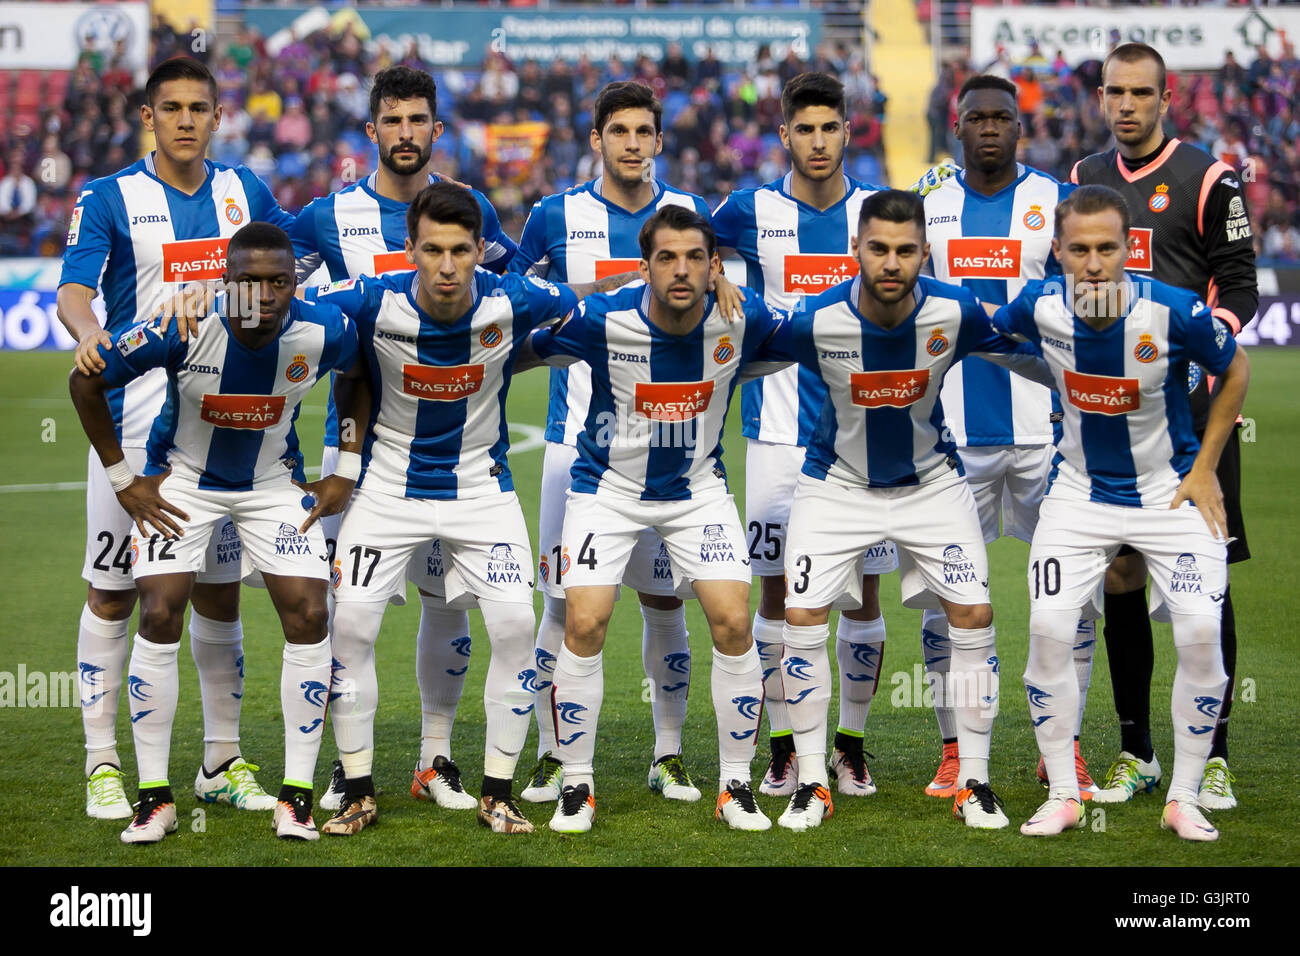 Valencia, Spain. 15th Apr, 2016. Espanyol team during La Liga match between Levante UD and RCD Espanyol at Ciutat de Valencia Stadium. La Liga match between Levante UD vs RCD Espanyol, with a final score 2-1. Rossi and Medjani scored for Levante and Hernan Perez scored for RCD Espanyol. © Jose Miguel Fernandez de Velasco/Pacific Press/Alamy Live News Stock Photo